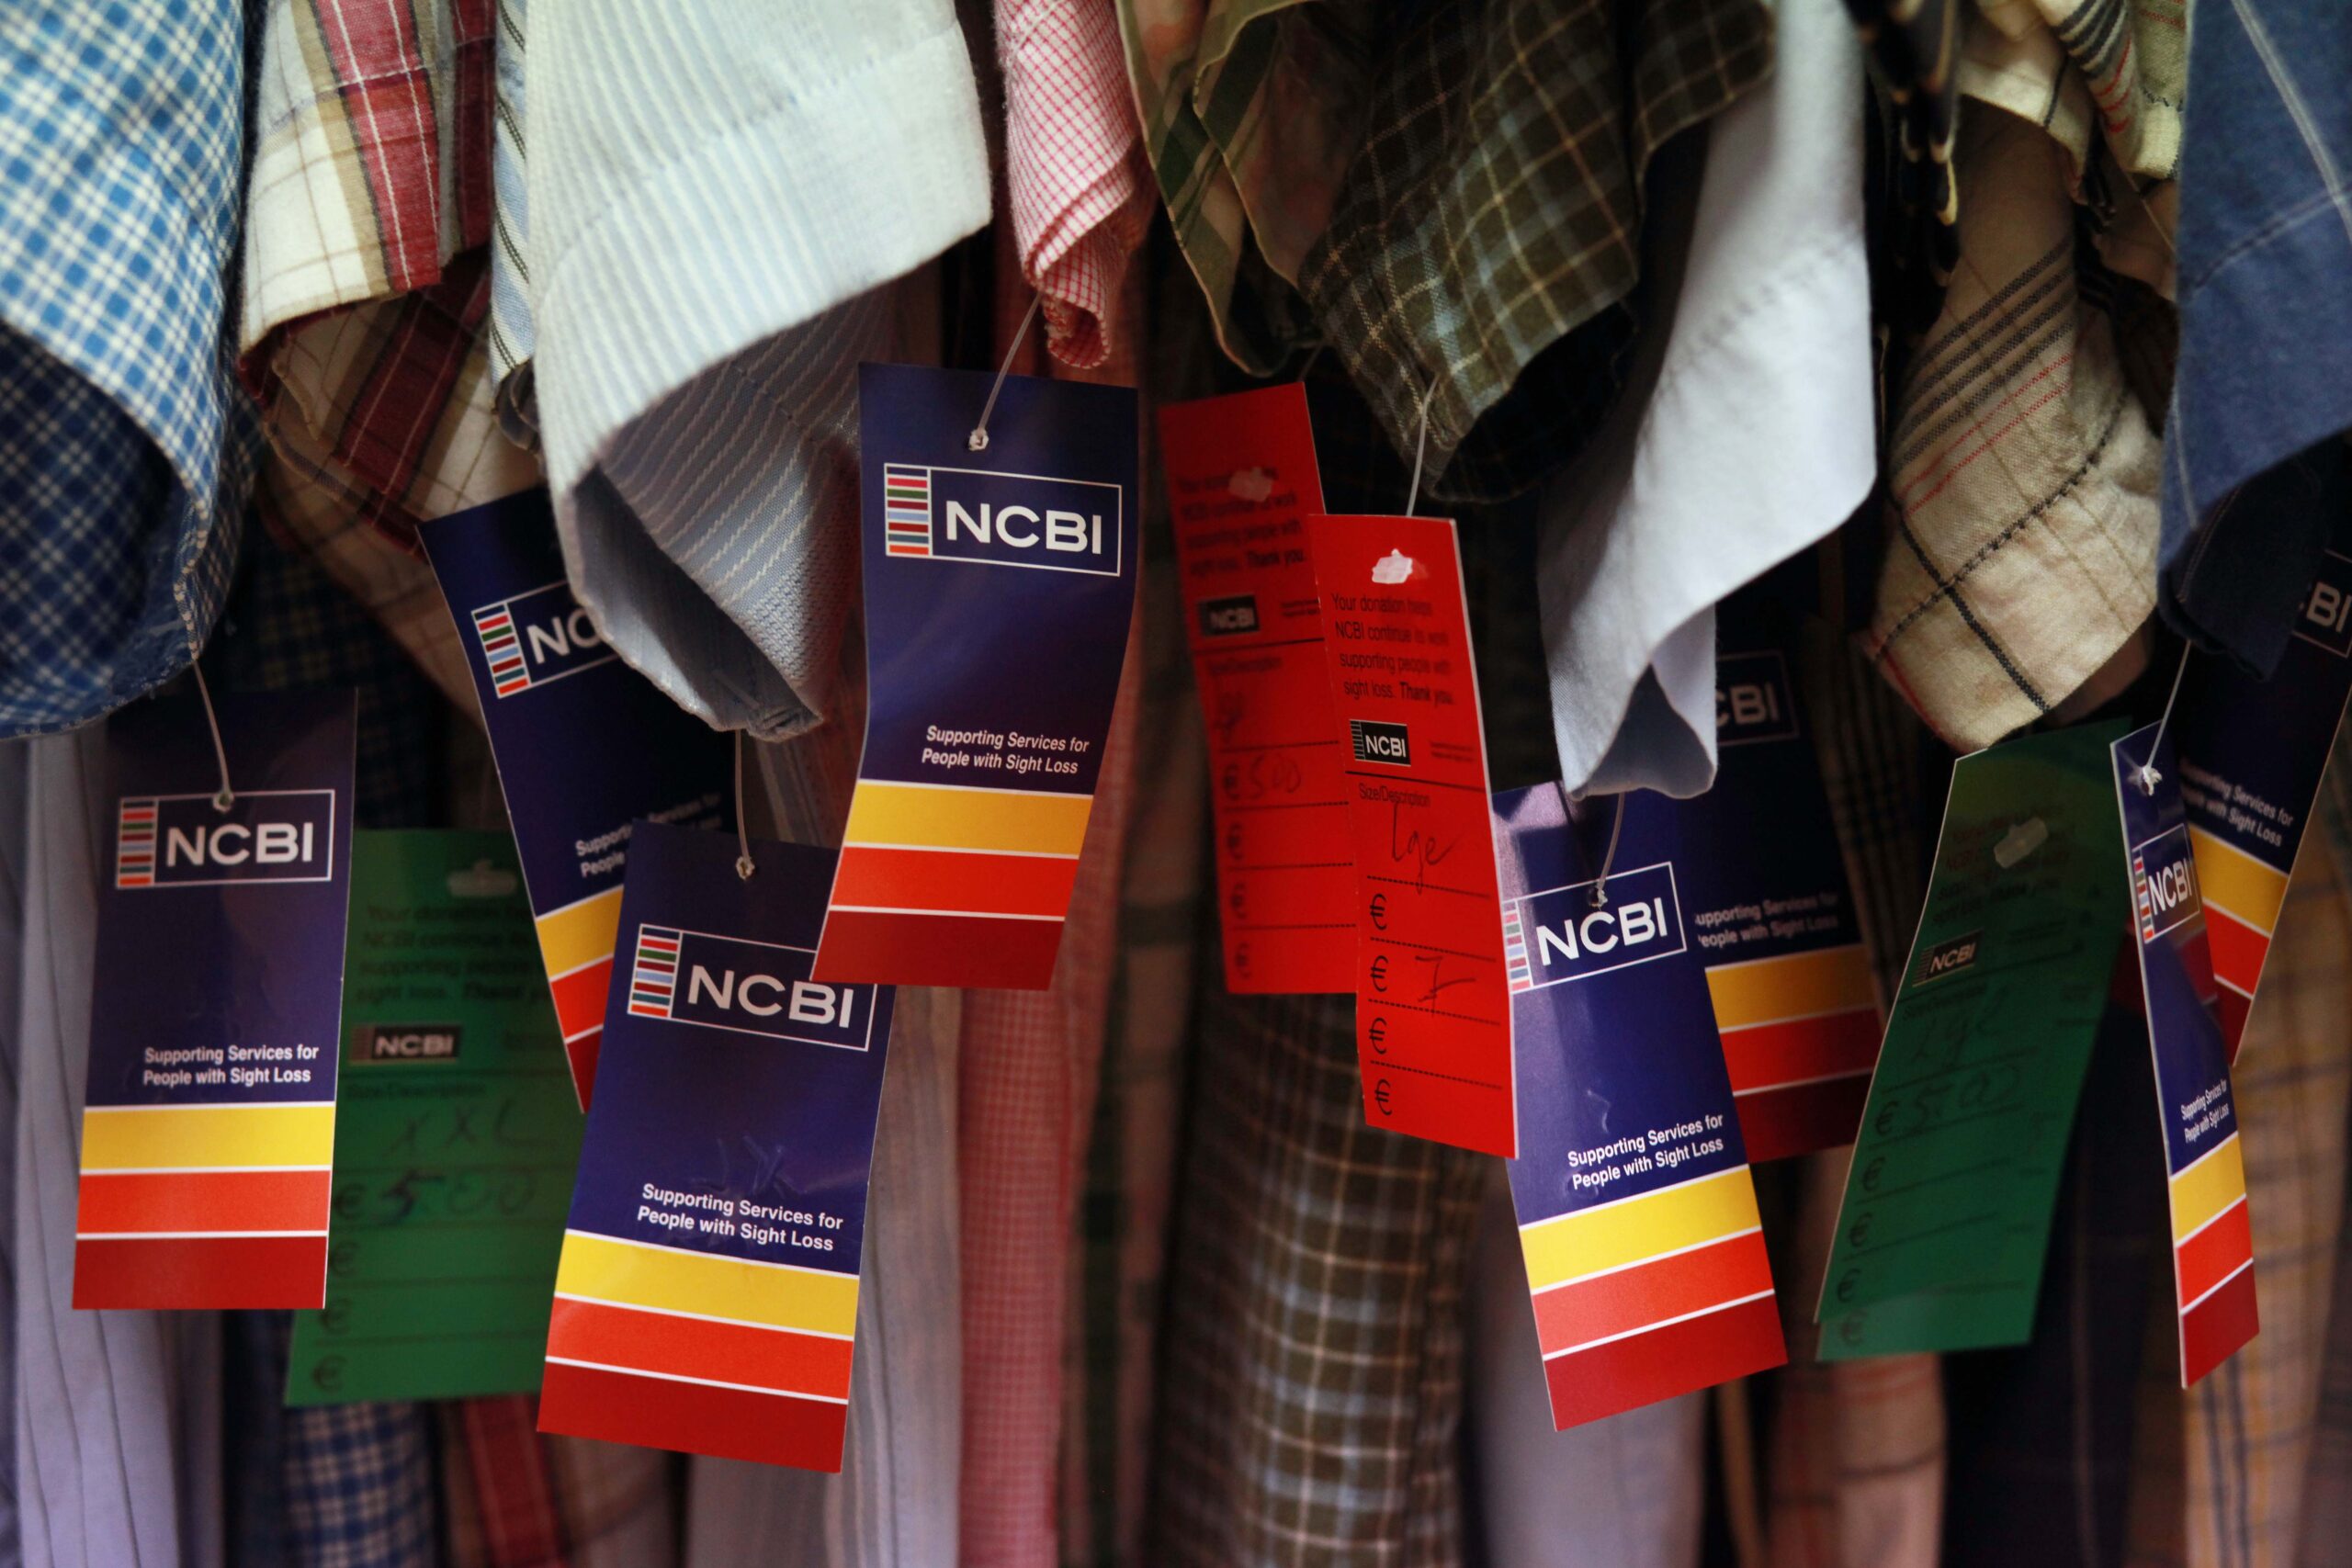 Rail full of clothes with NCBI price tags